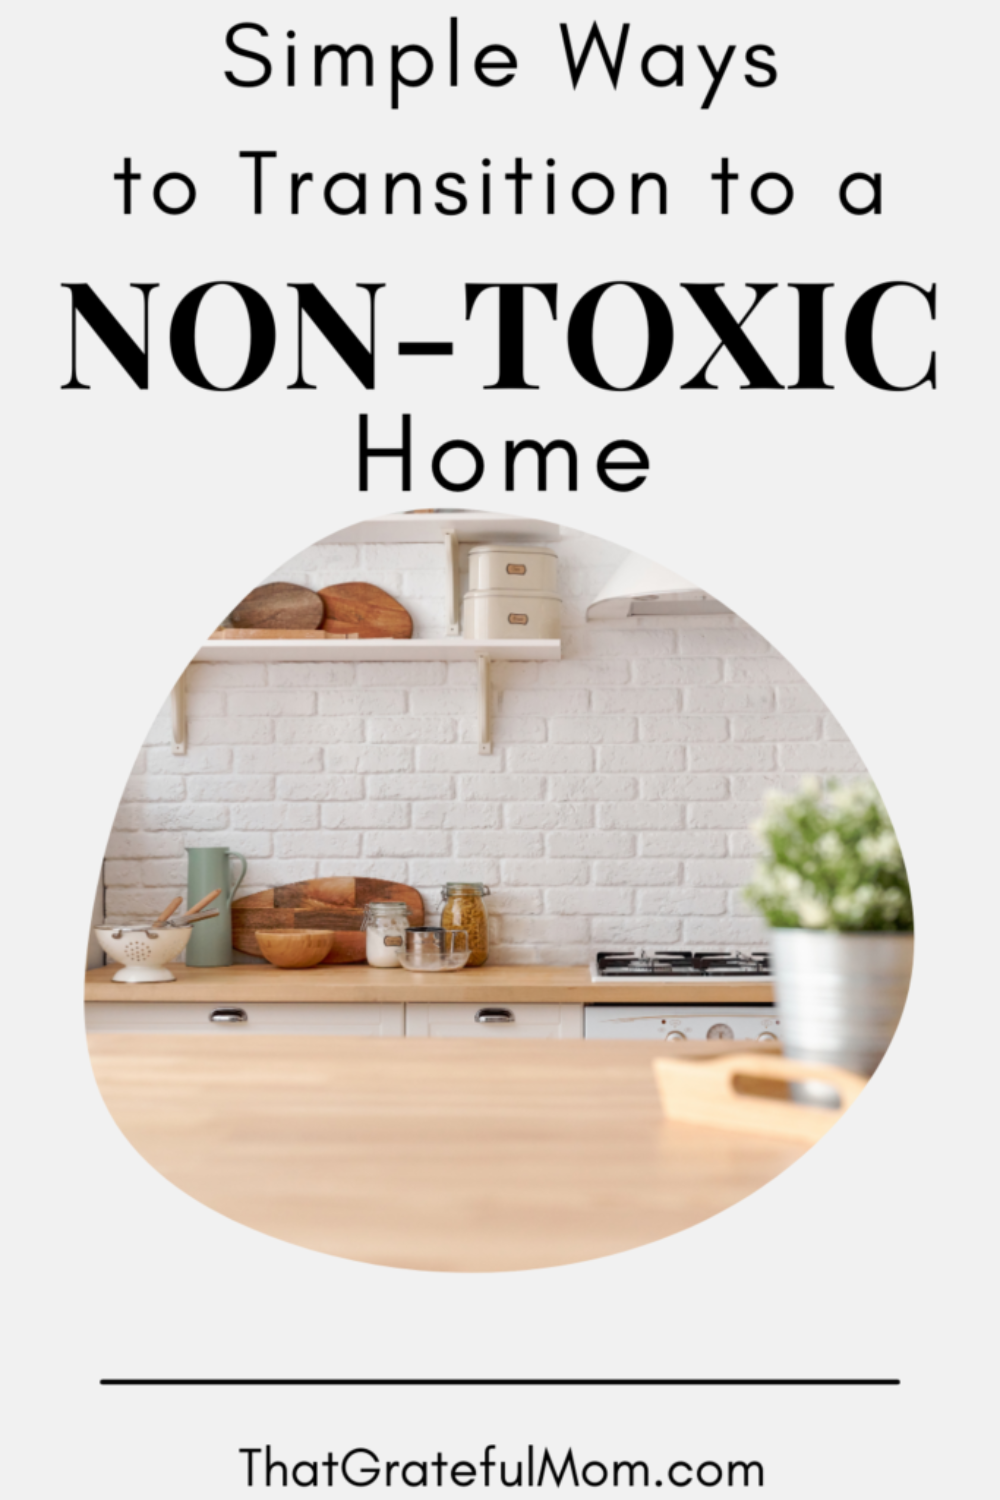 Simple Ways to Transition to a non-toxic home